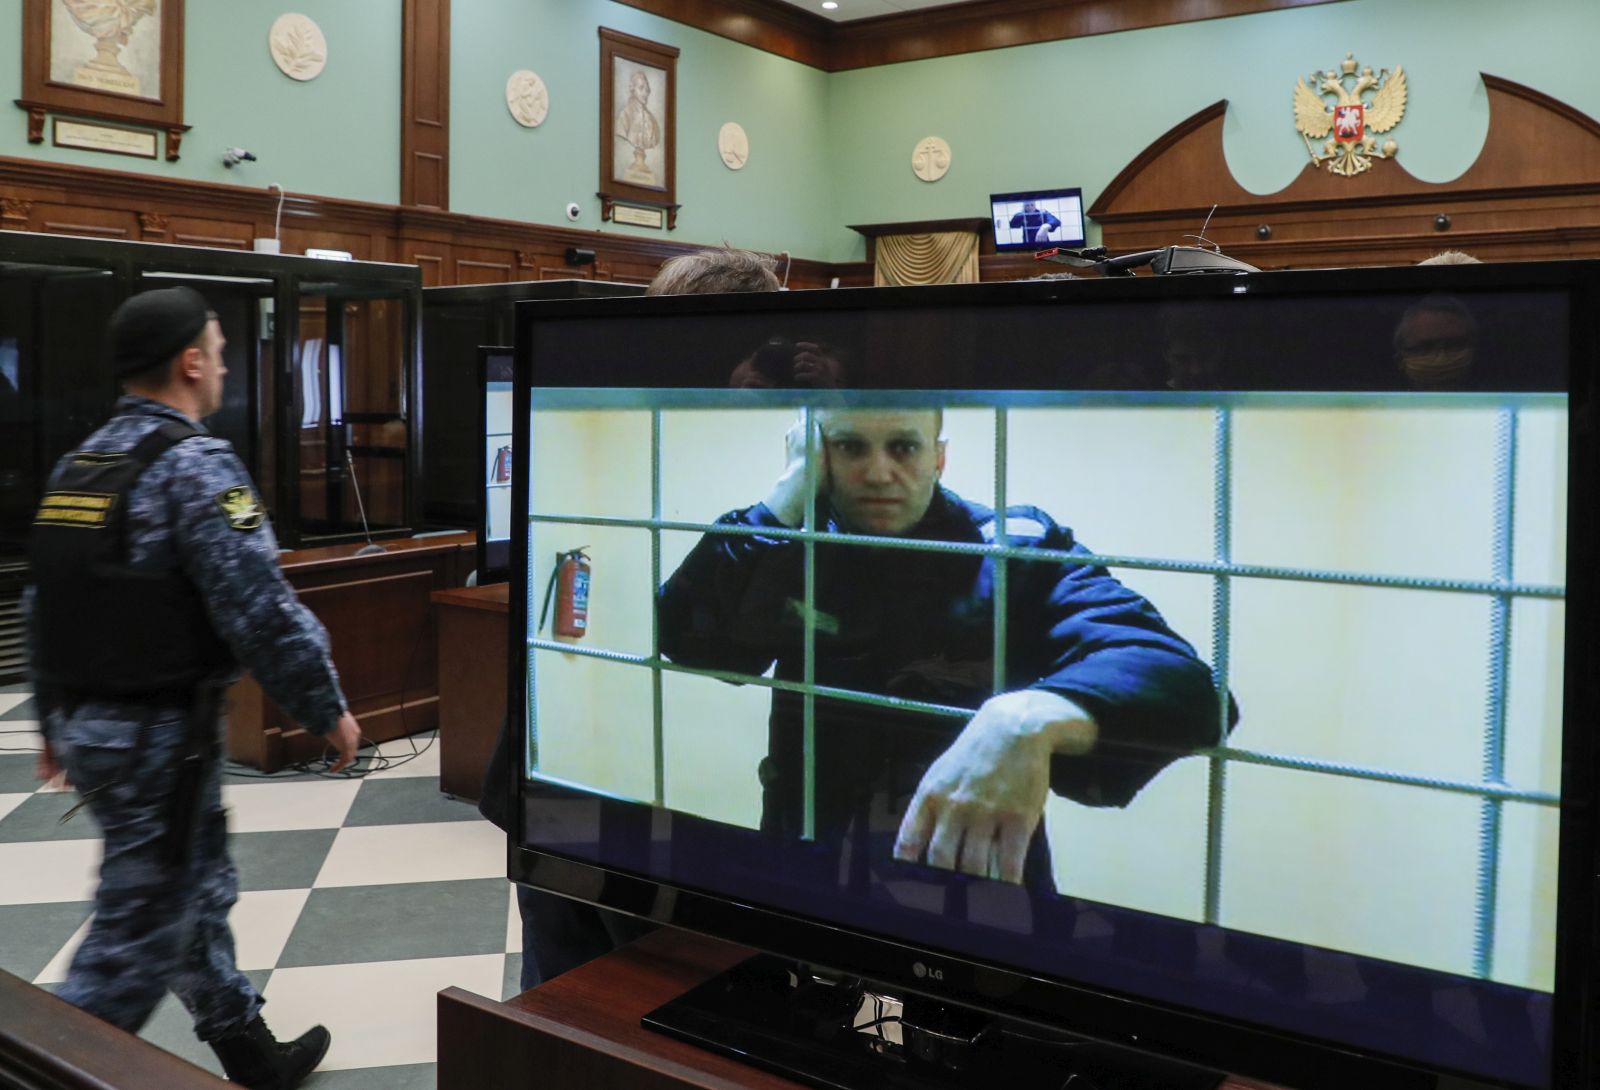 epa09971351 Russian opposition leader Alexei Navalny is shown on a monitor screen via video link from the penal colony No. 2 (IK-2) in Pokrov in Vladimir region, during a hearing of an appeal against Lefortovsky court sentence at the Moscow city court in Moscow, Russia, 24 May 2022. The Lefortovsky court sentenced politician Alexei Navalny to nine years in a strict regime colony and a fine of 1.2 million rubles for large-scale fraud and insulting the court. The Moscow city court upholded Navalny's conviction.  EPA/YURI KOCHETKOV